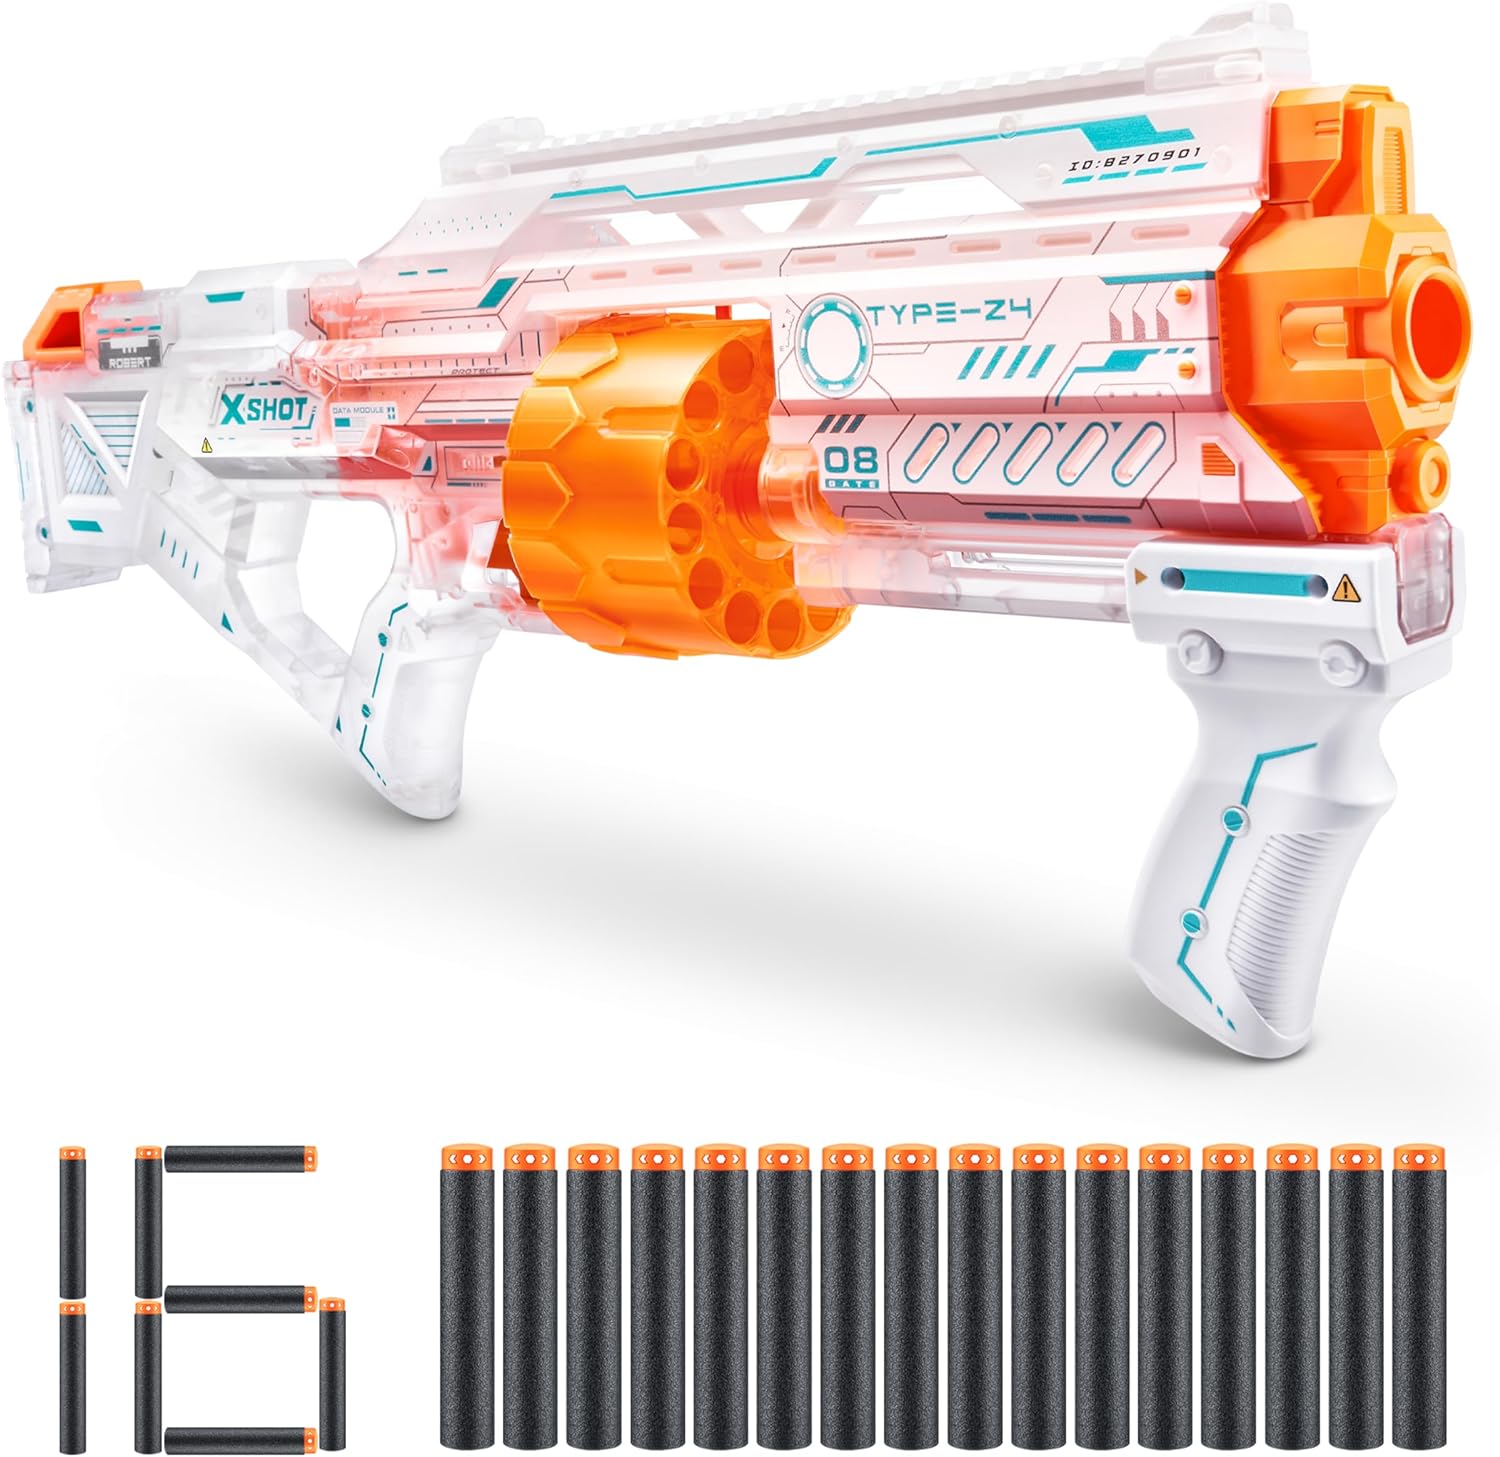 X-Shot Skins Last Stand Ghost Blaster by ZURU with 16 Darts, Slam Fire Action, Air Pocket Dart Technology, Toy Foam Blaster for Kids, Teens and Adults (Ghost)